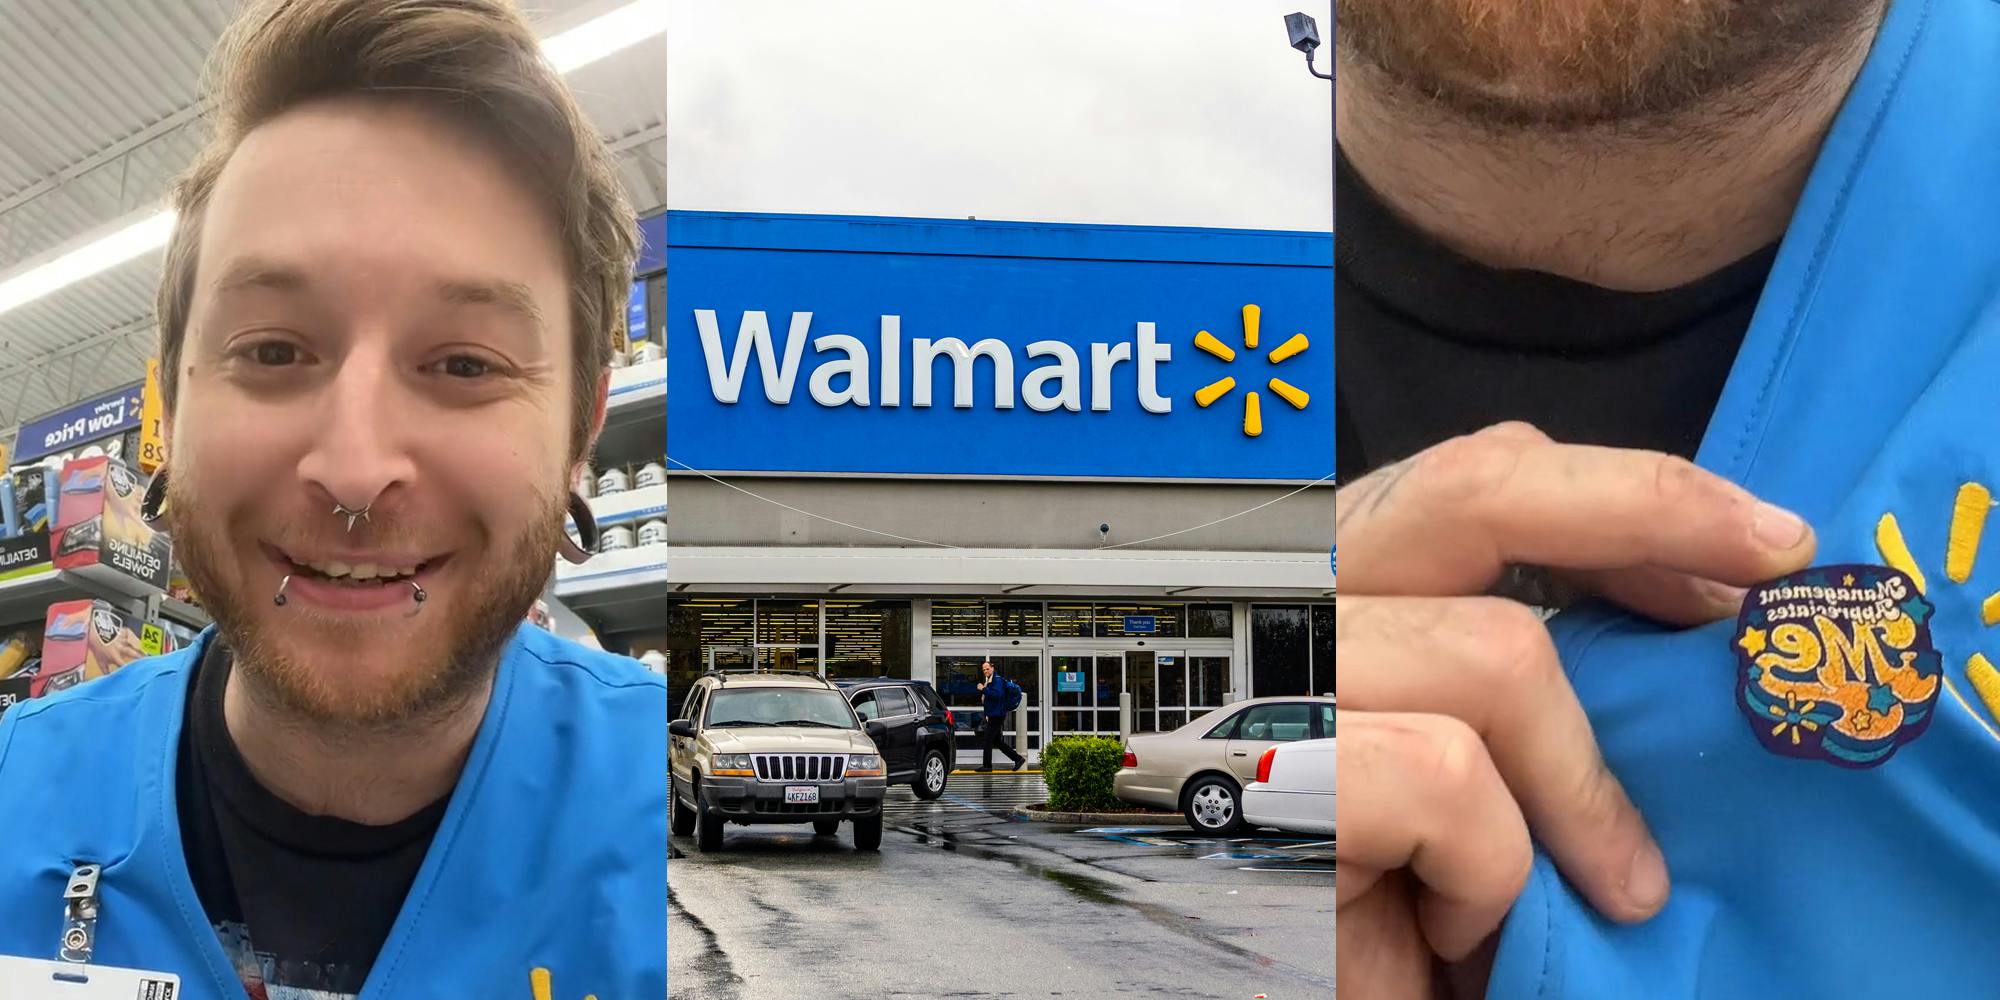 ‘As a former Walmart employee.. it’ll fade’: New Walmart worker brags that store gave him button to wear to show its appreciation. It backfires